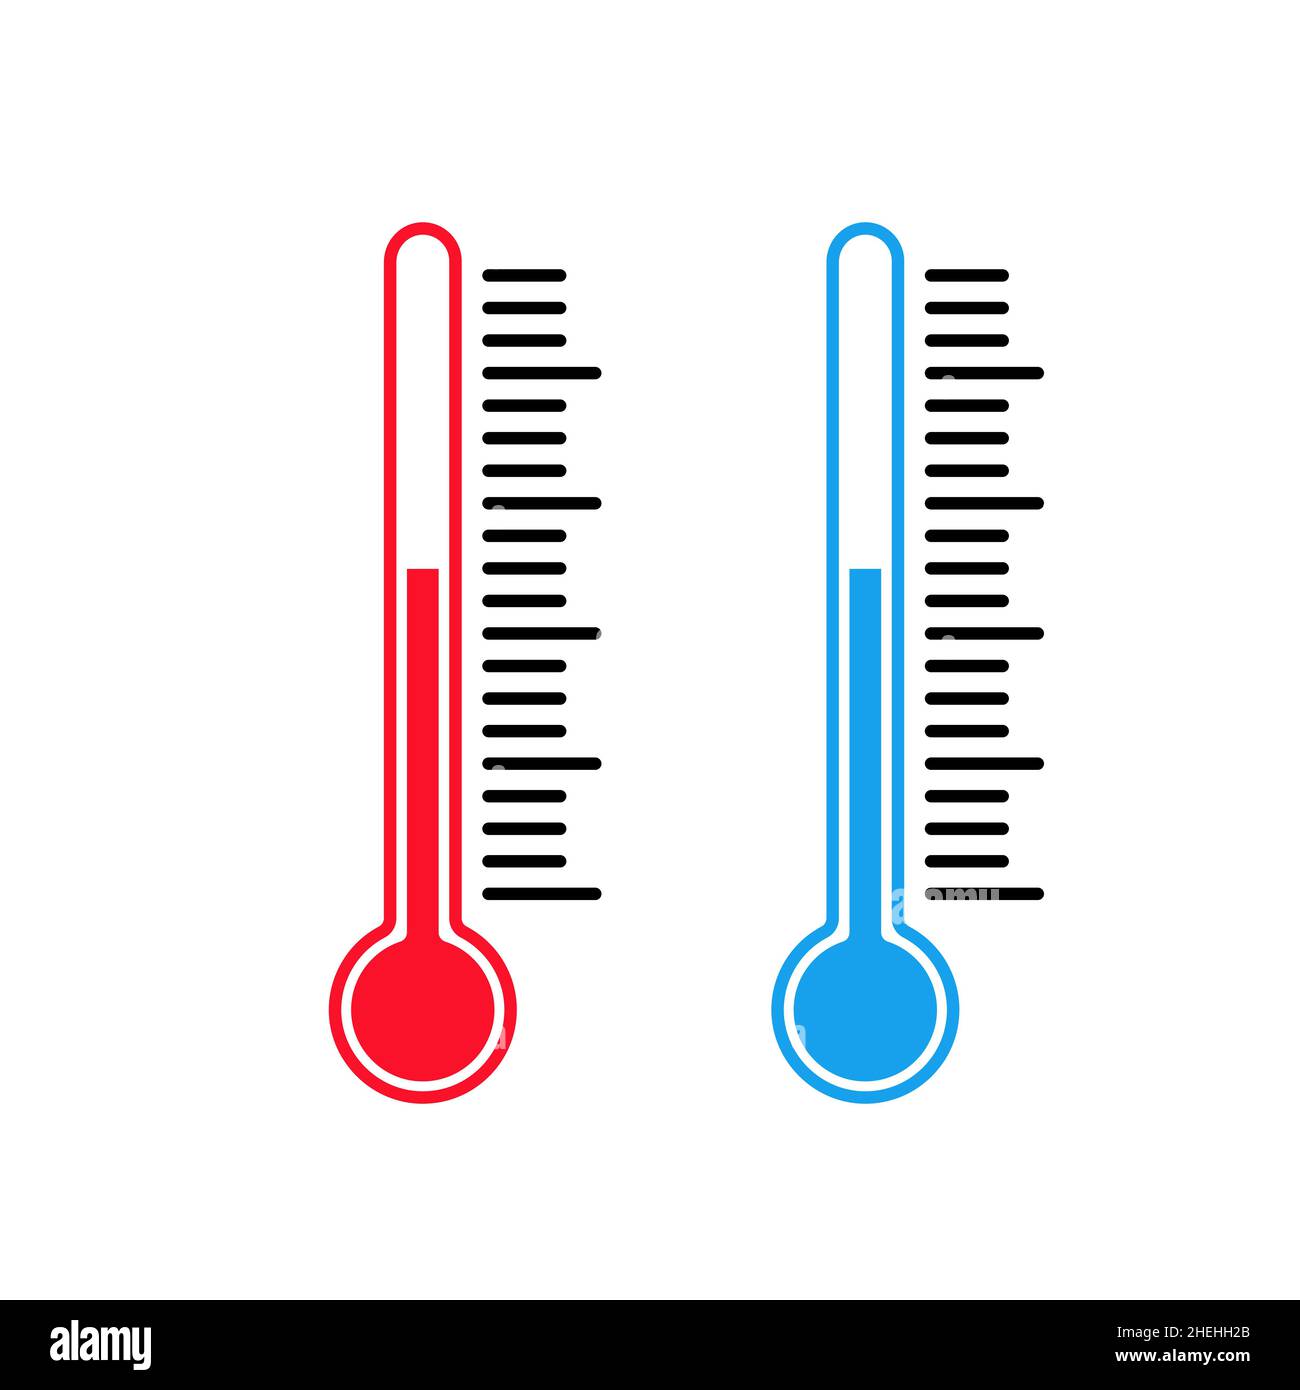 https://c8.alamy.com/comp/2HEHH2B/thermometer-icon-temperature-control-concept-high-and-low-temperature-vector-on-isolated-background-eps-10-2HEHH2B.jpg